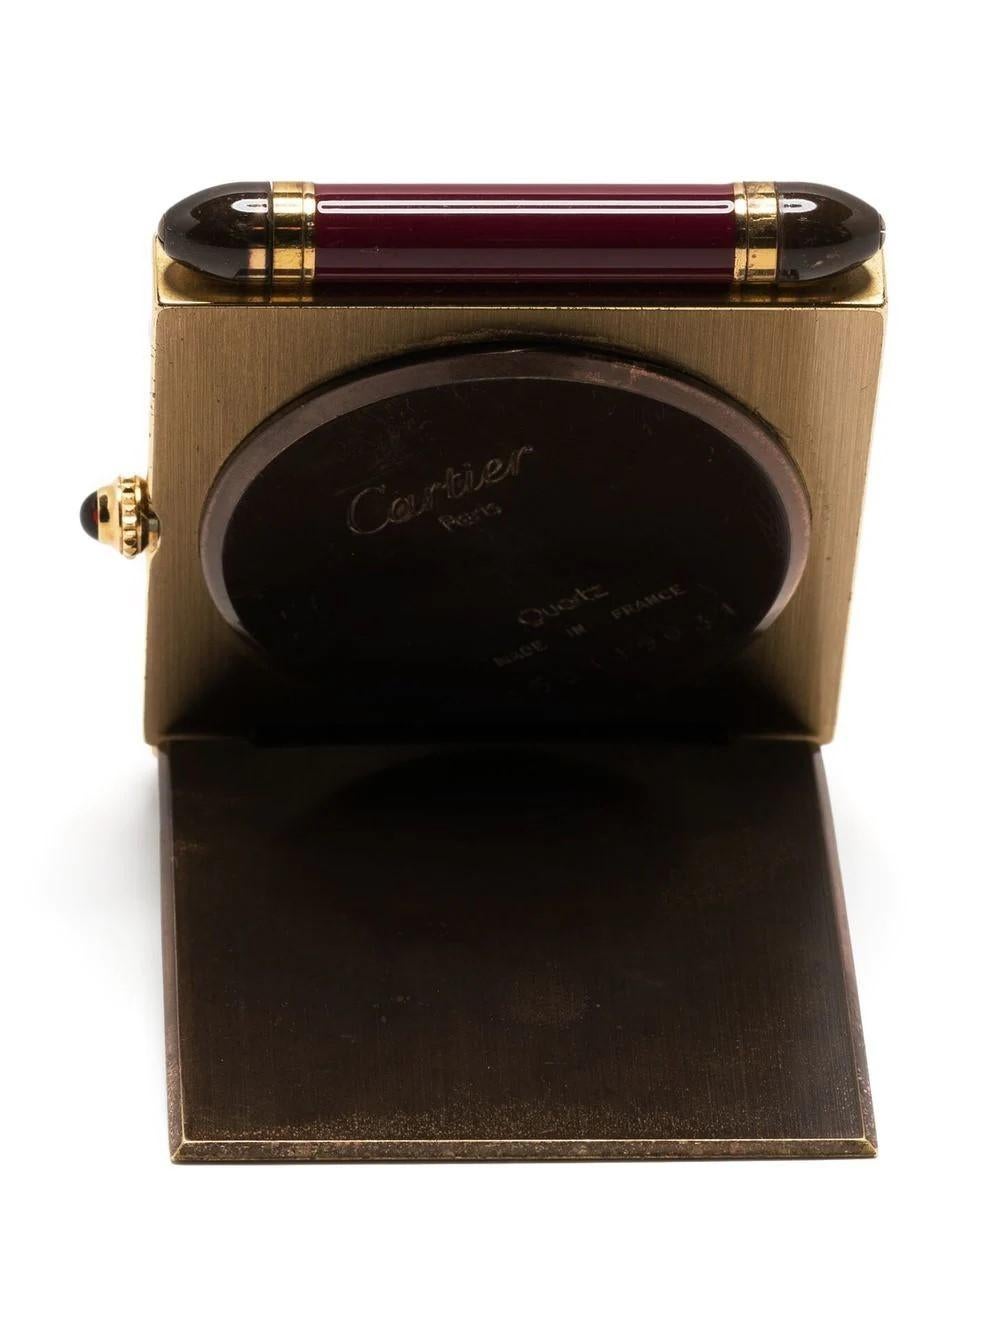 Cartier showcases its traditional horology expertise with this pre-owned alarm clock. Channelling a classic design aesthetic, the hand-wound pendulette is designed to sit tableside and boasts a signature square face with Roman numerals around the